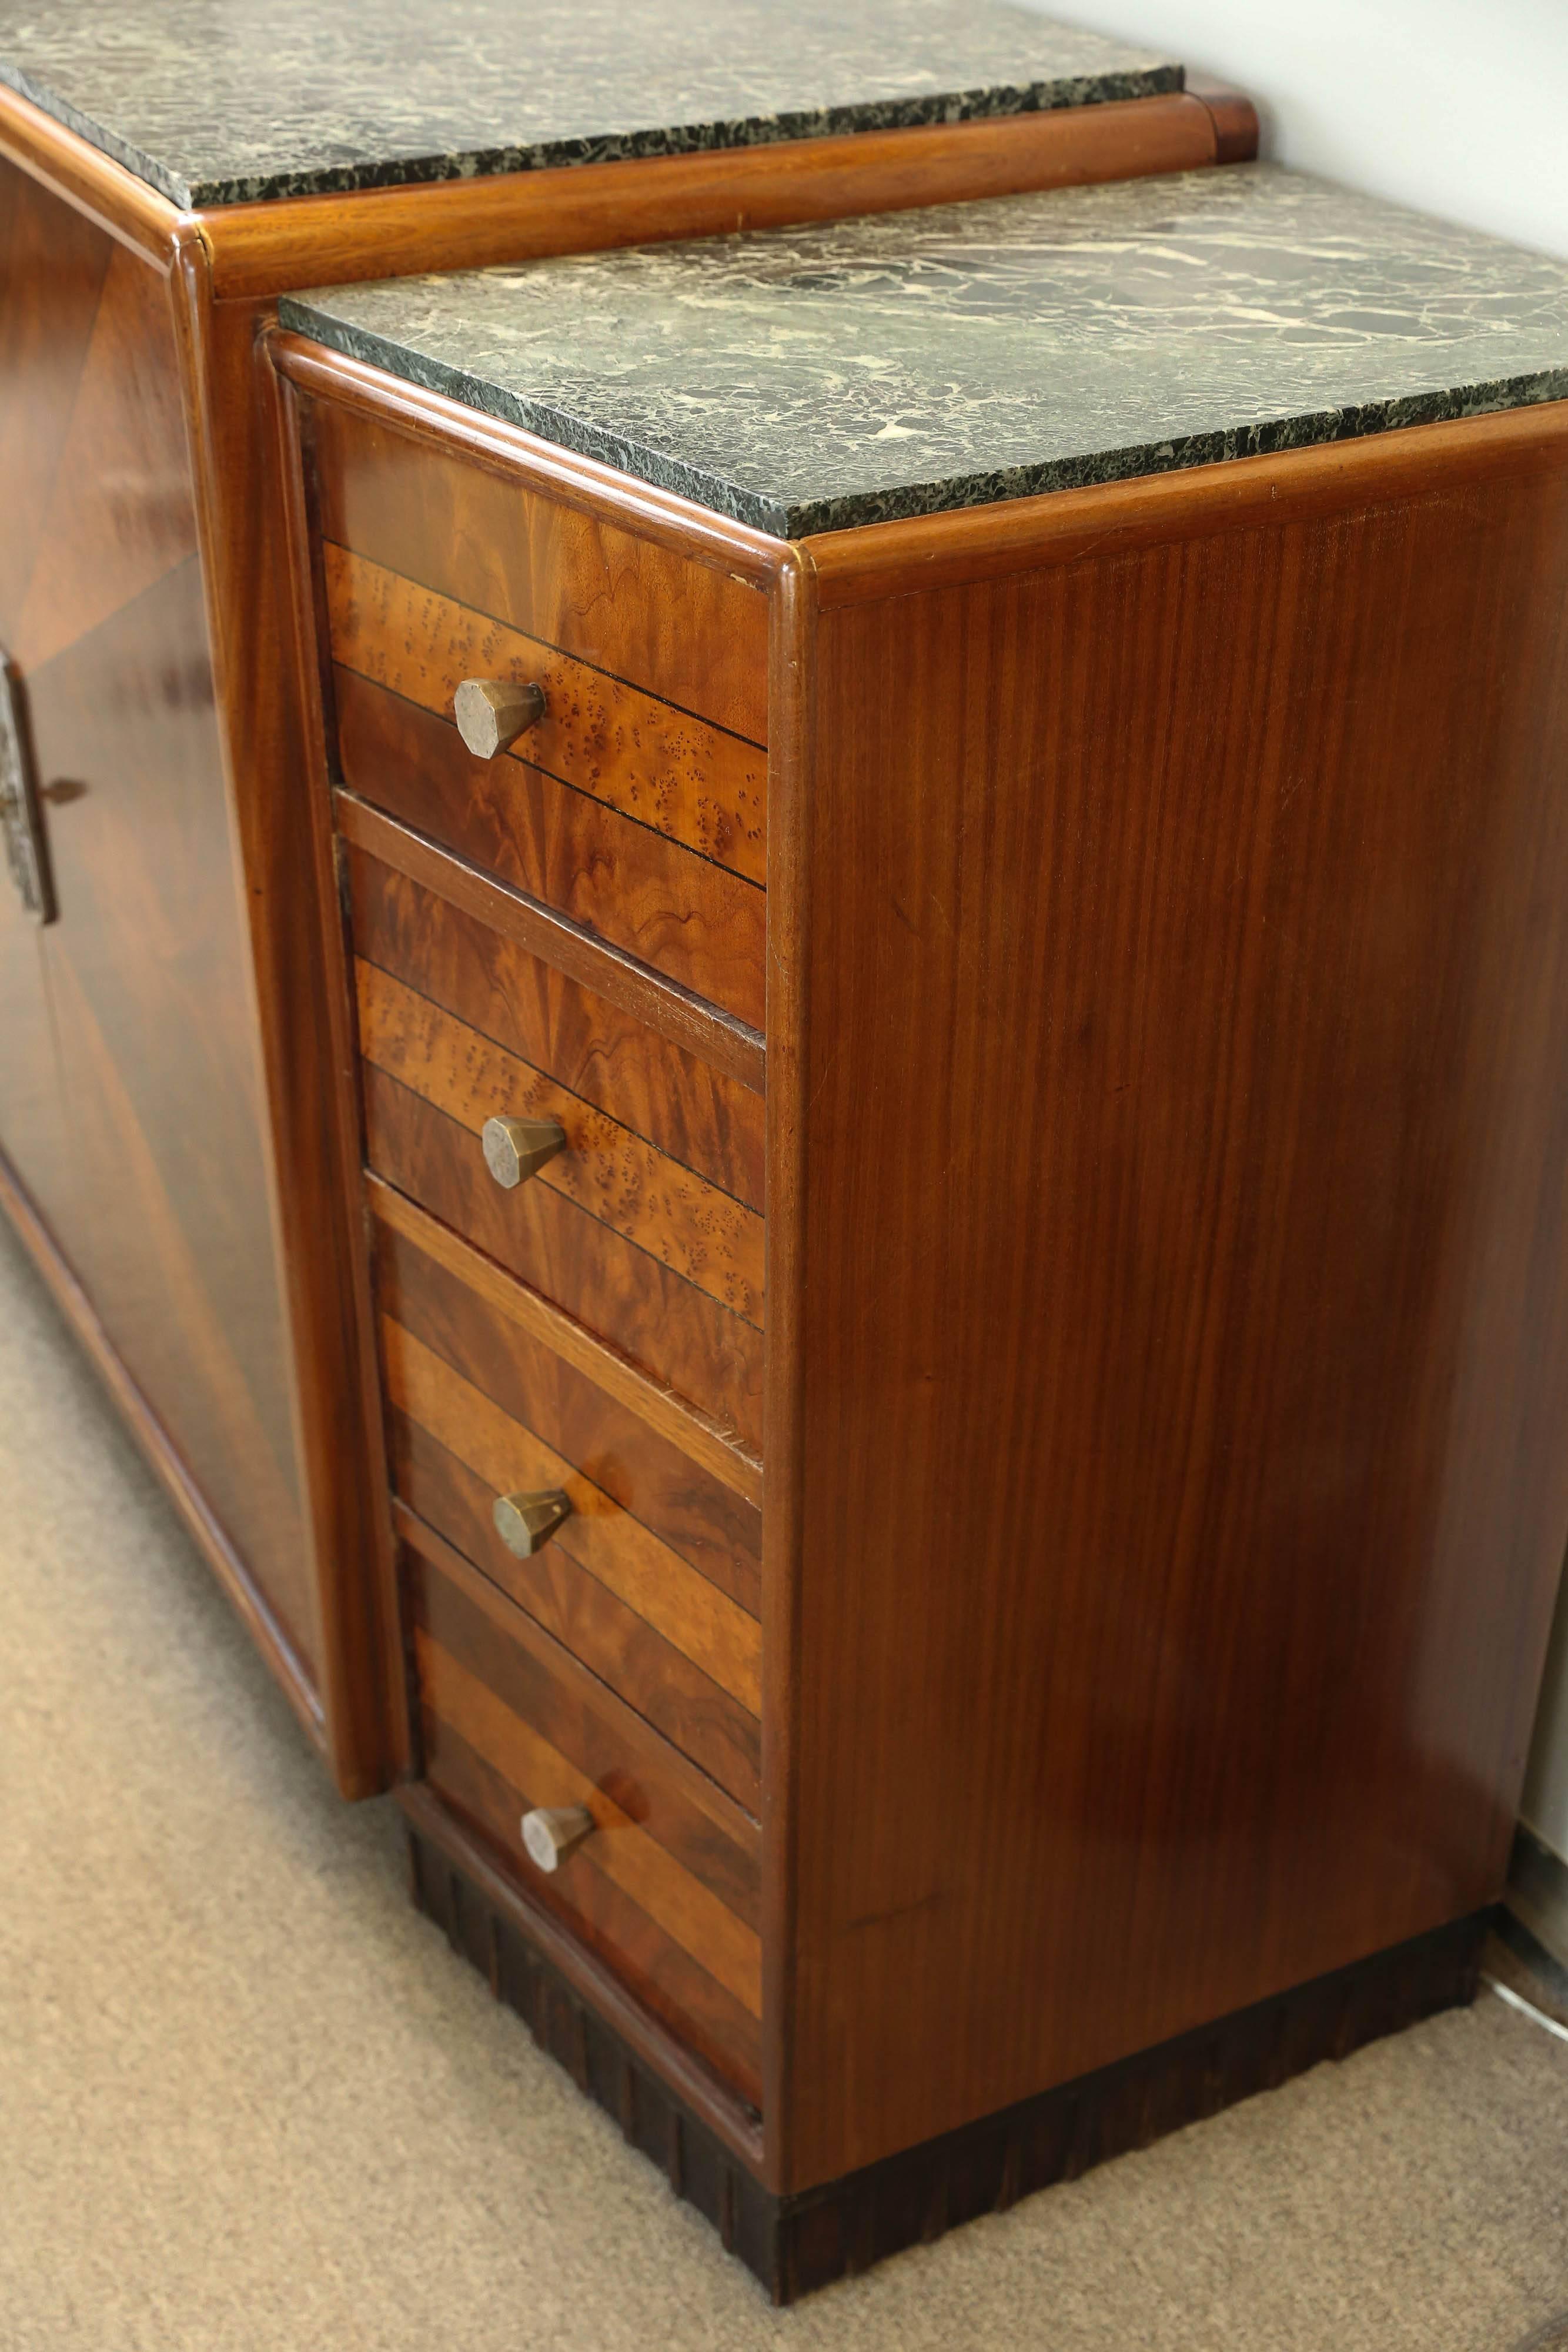 Mahogany, wood veneer decorates this well designed furniture. Having two columns housing four drawers on either side which are holding a suspended middle section that has two large double doors. Original silvered hardware. Marble tops over the